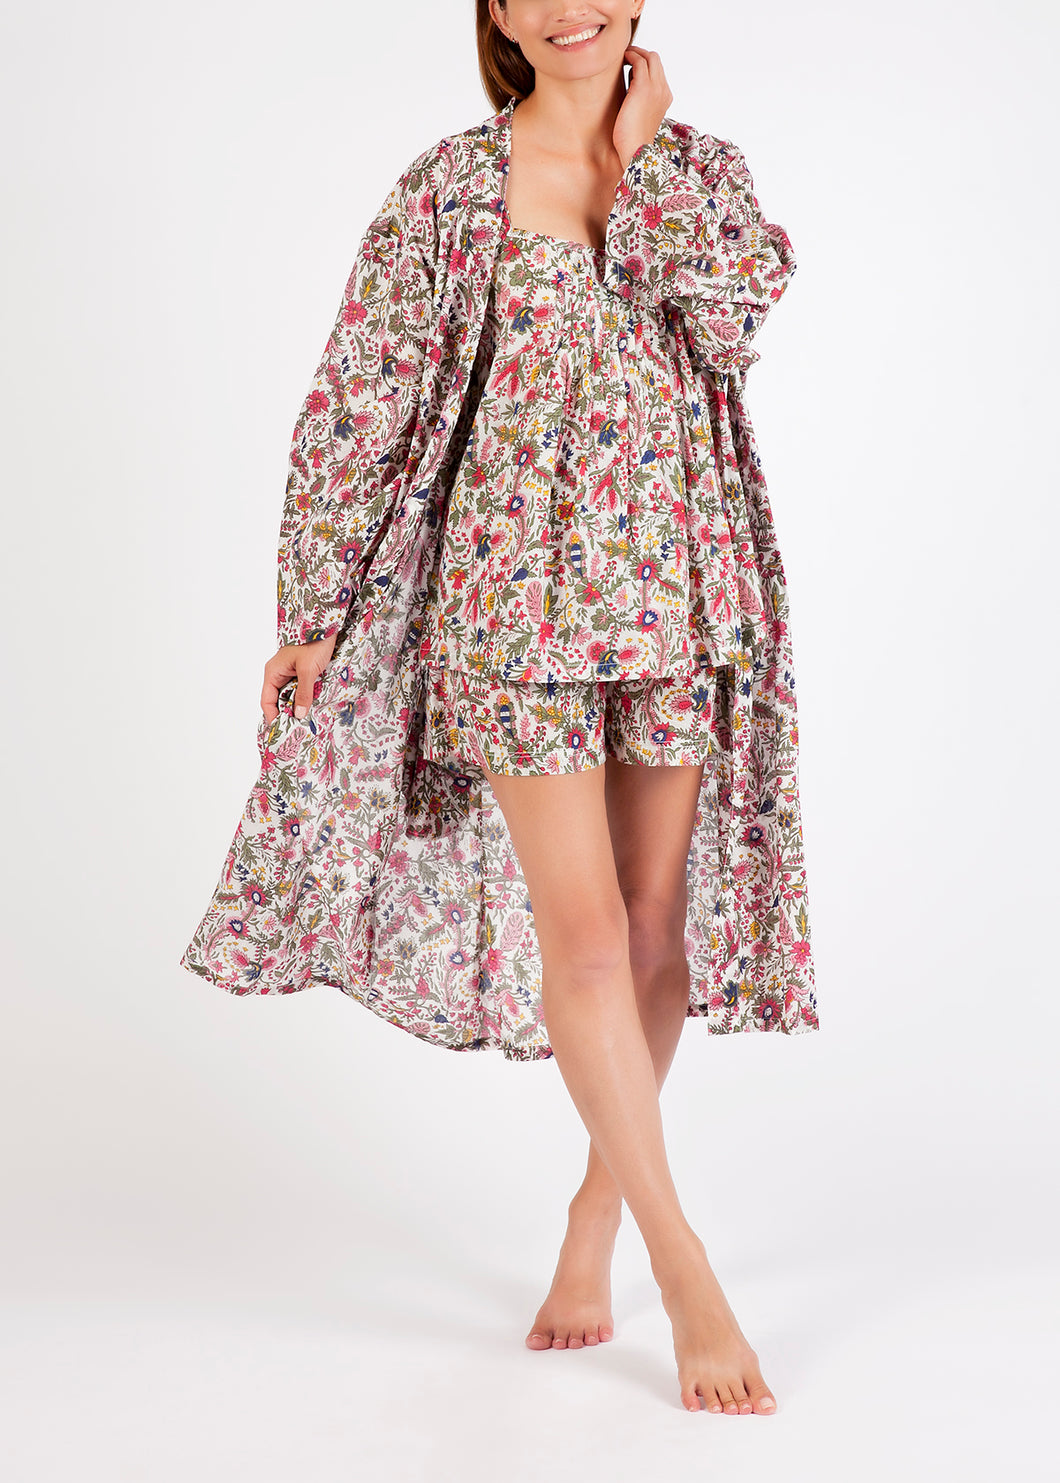 Cotton Dressing Gown/Robe - Mixed Floral